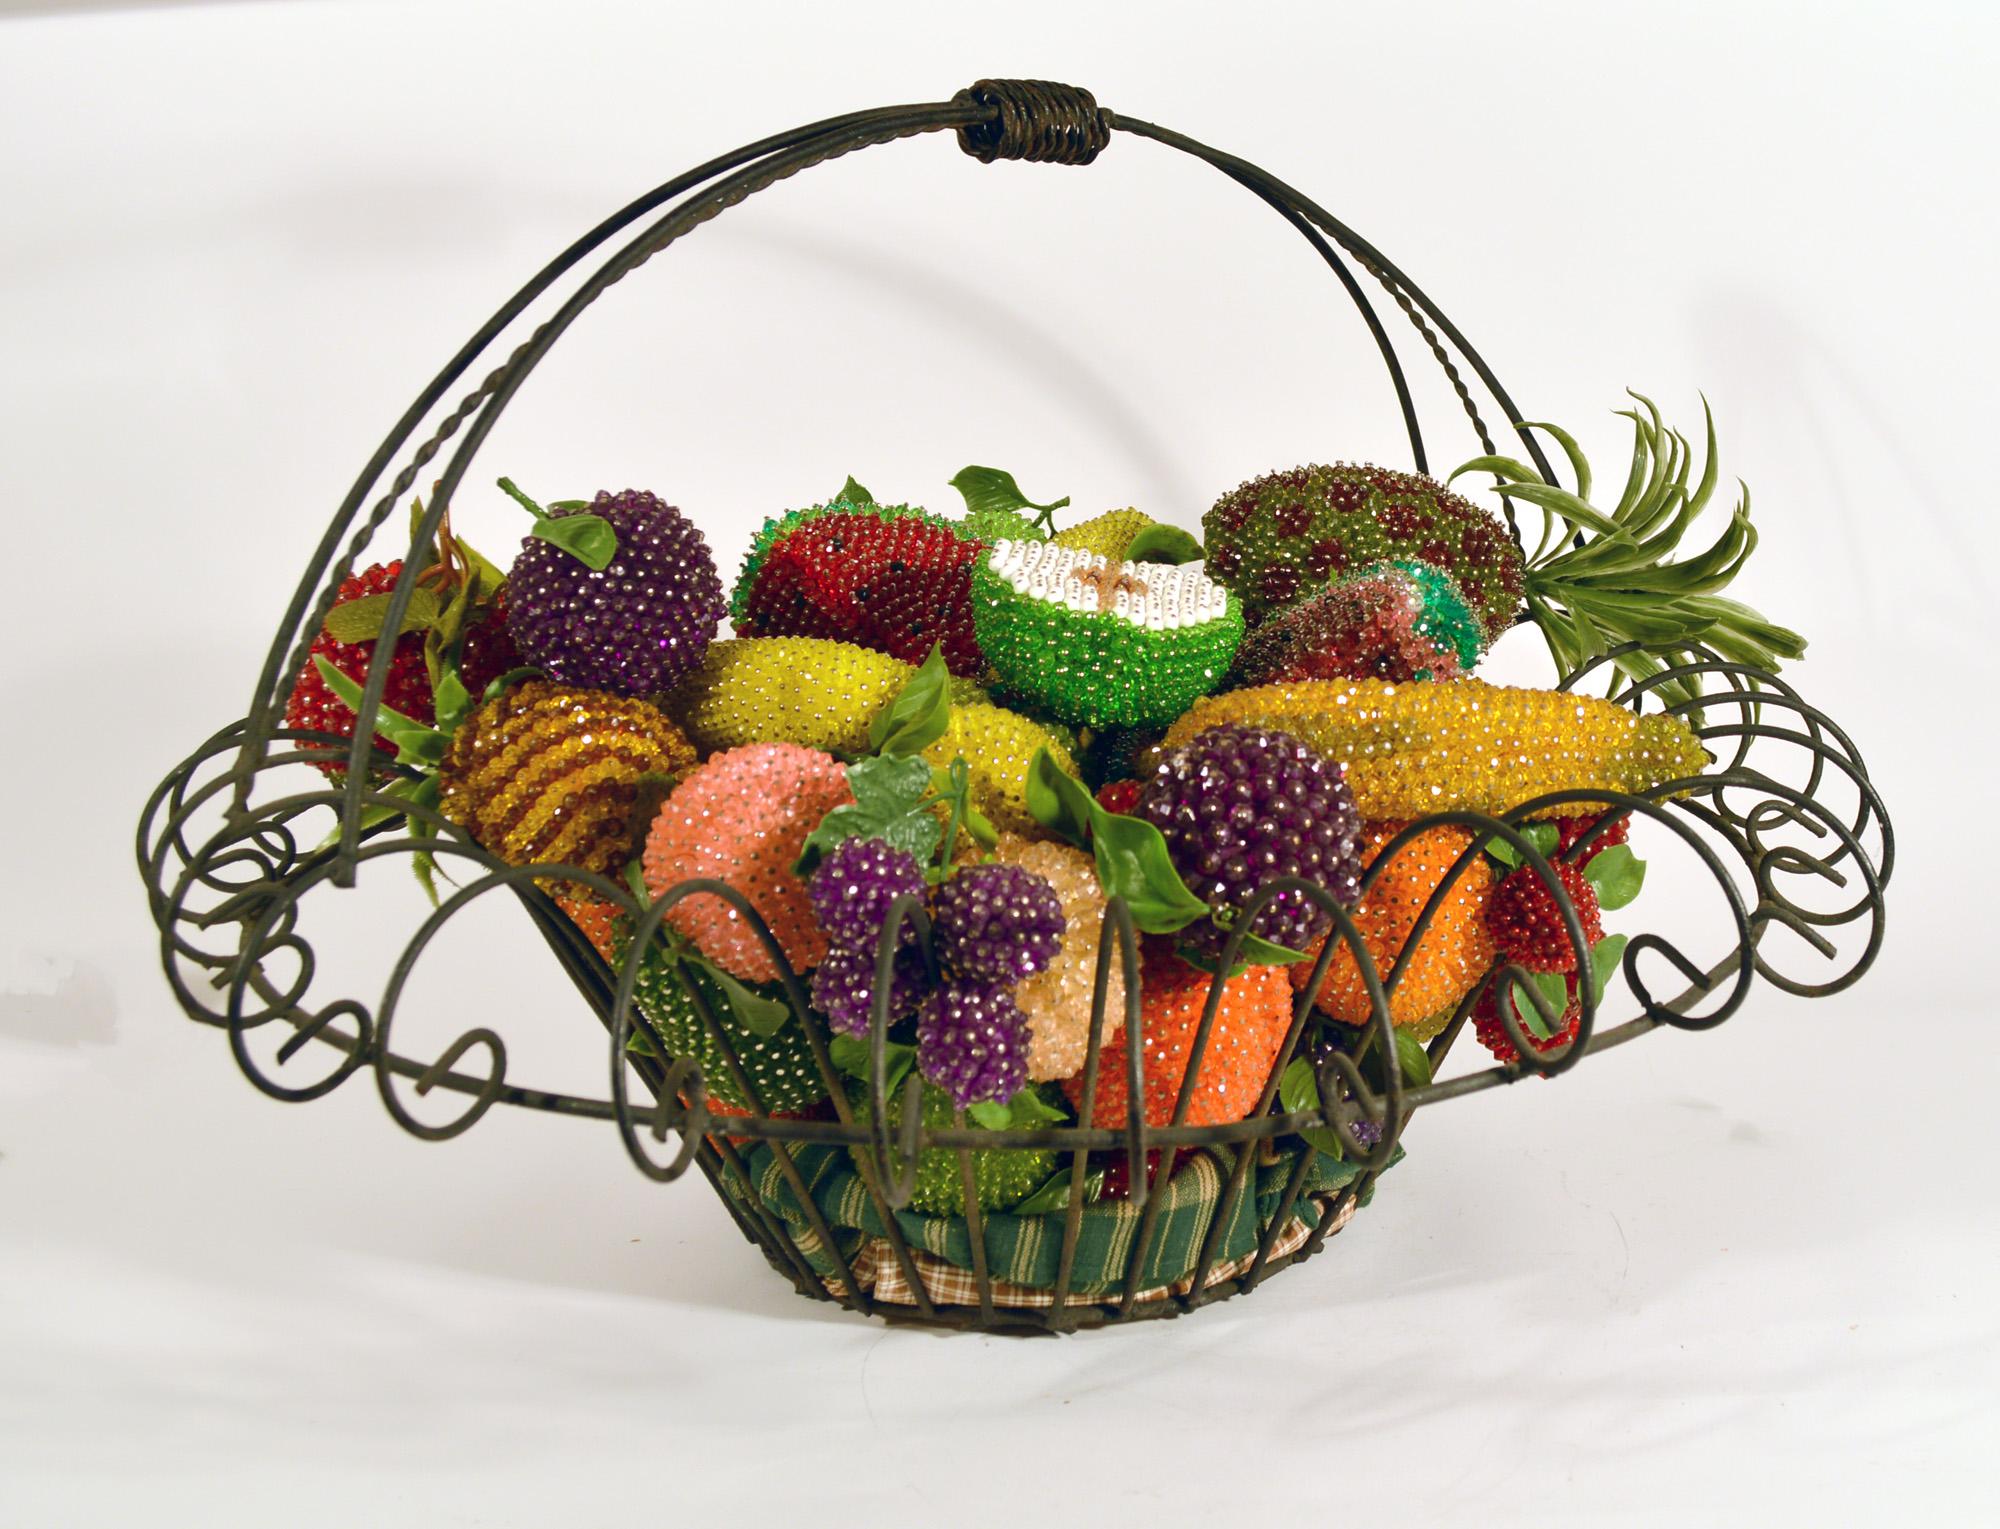 American Folk Art metal basket of beaded fruit,
Basket early 20th Century, fruit 1940s-60s.

The dramatic early 20th Century metal openwork basket contains a large collection of beaded fruit including watermelons, bananas, grapes, raspberries,